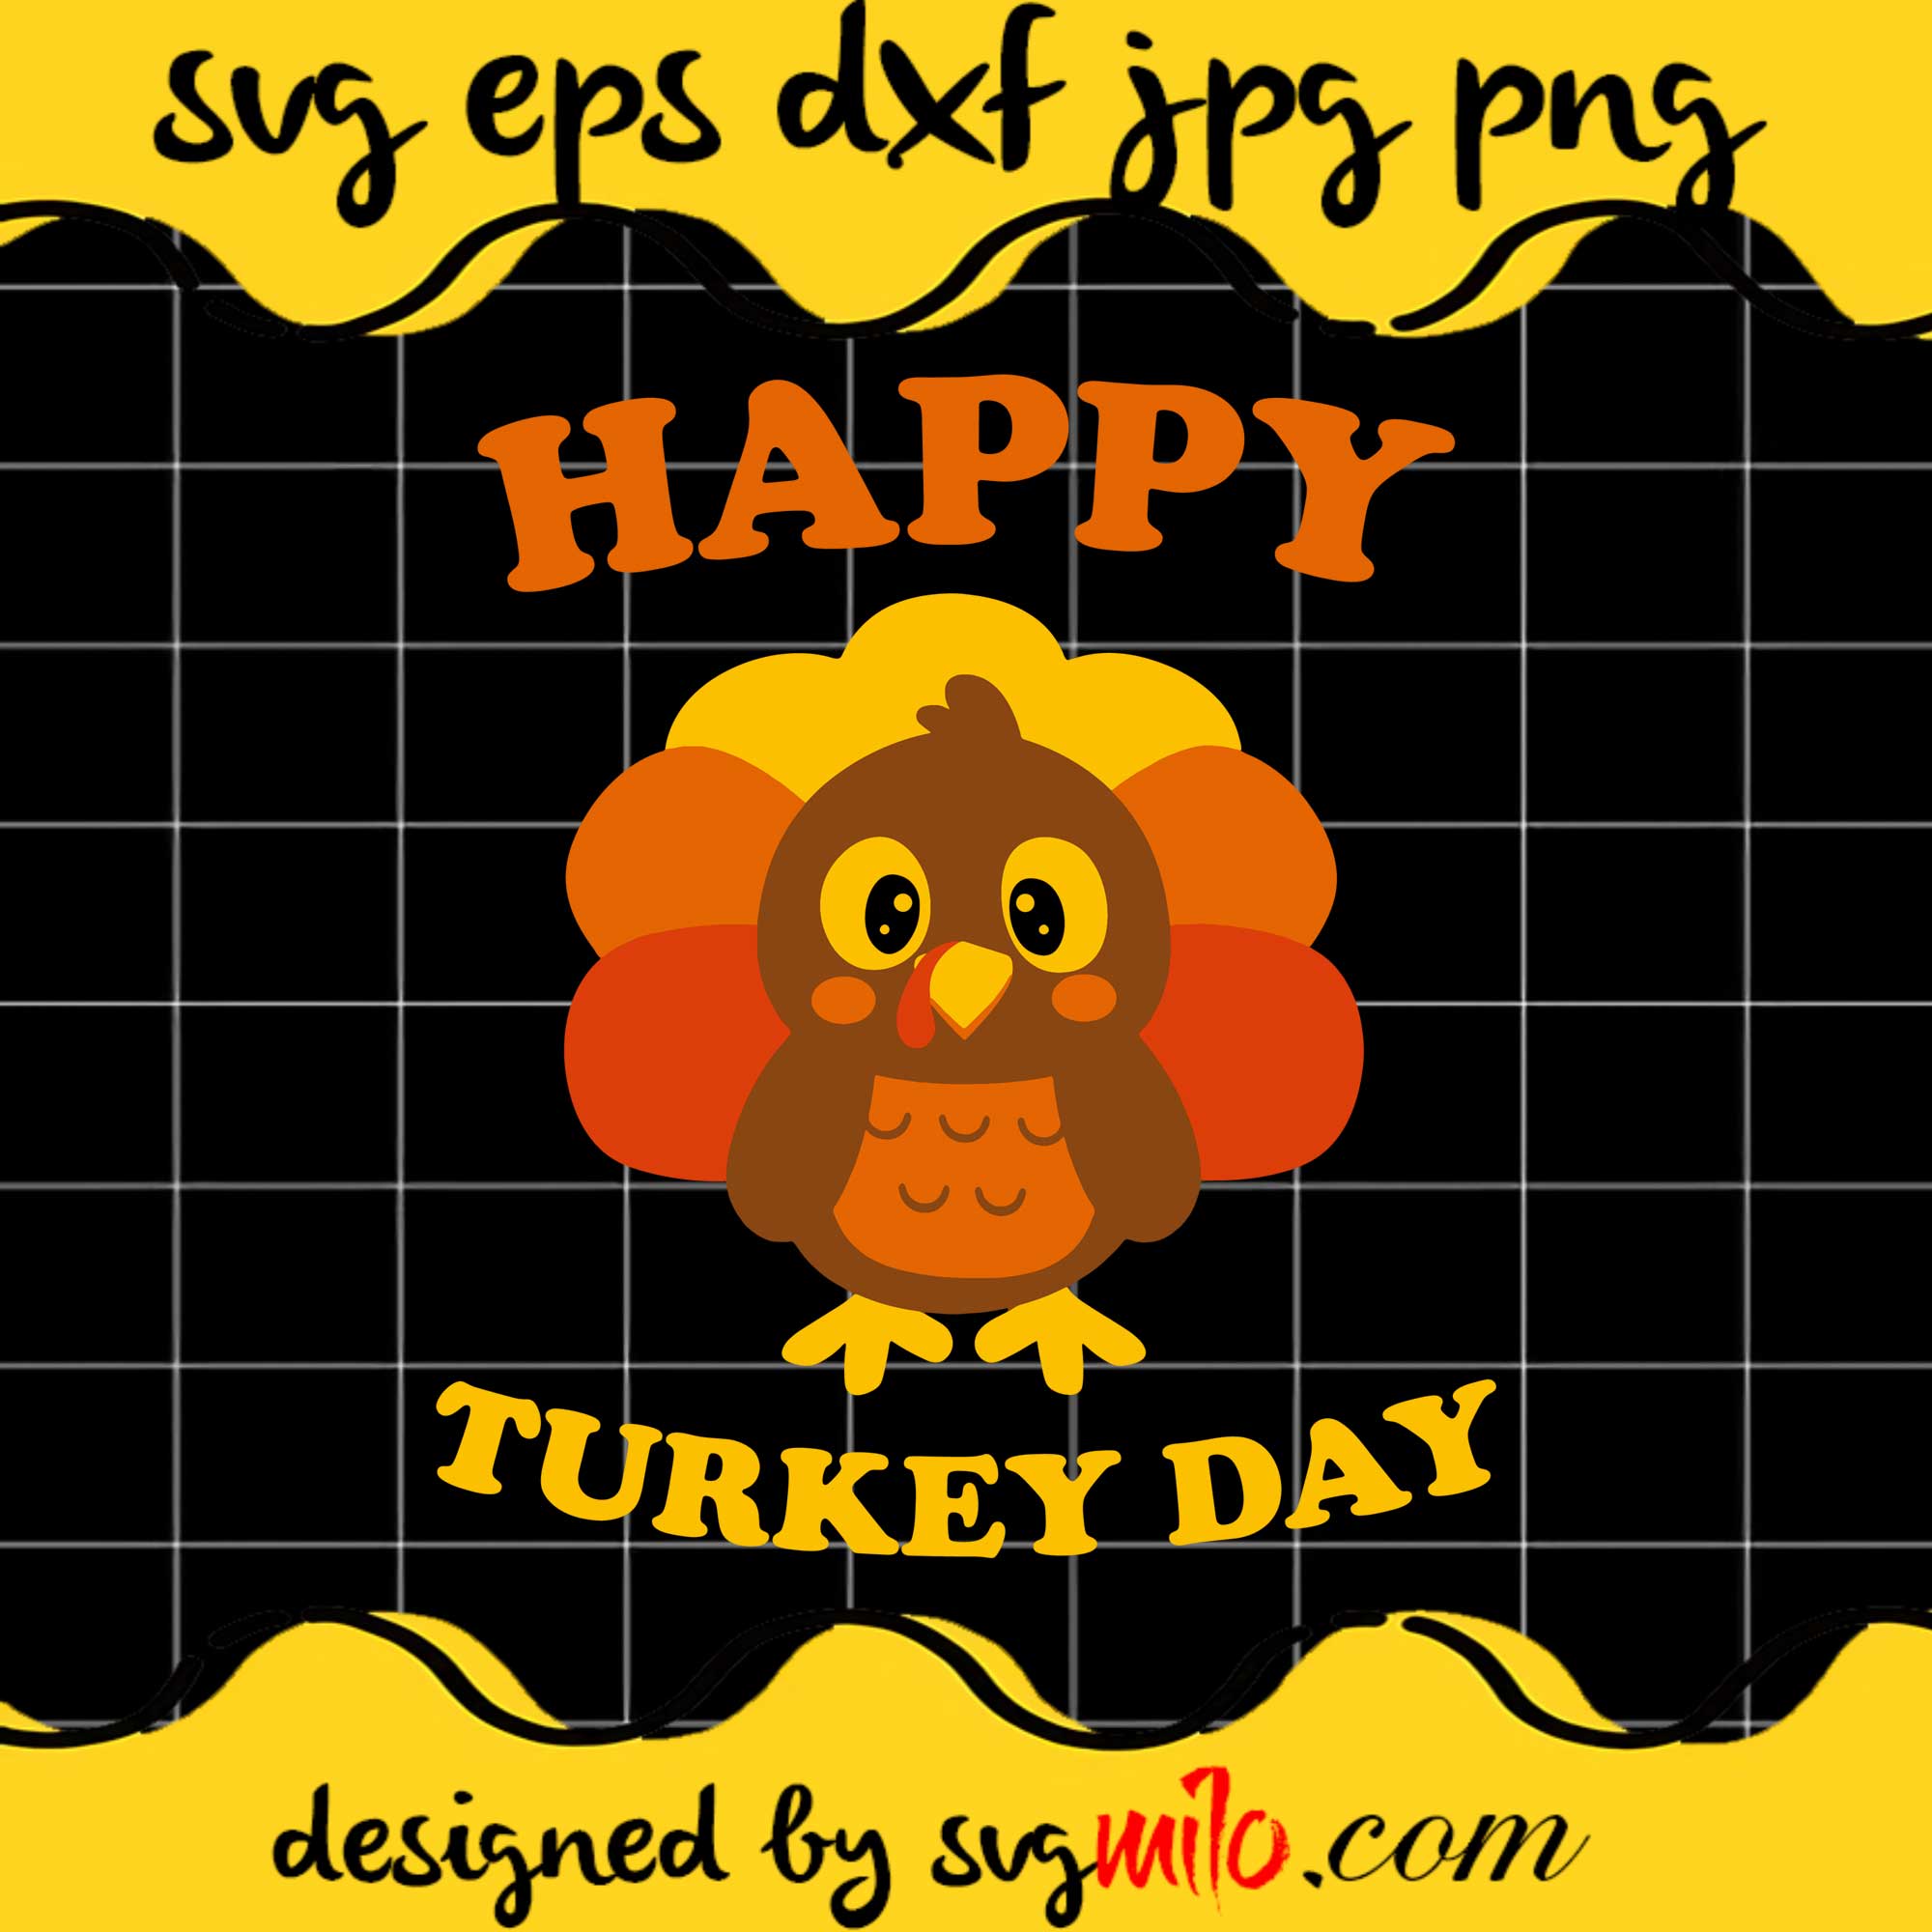 Happy Turkey Day SVG PNG DXF EPS Cut Files For Cricut Silhouette,Premium quality SVG - SVGMILO